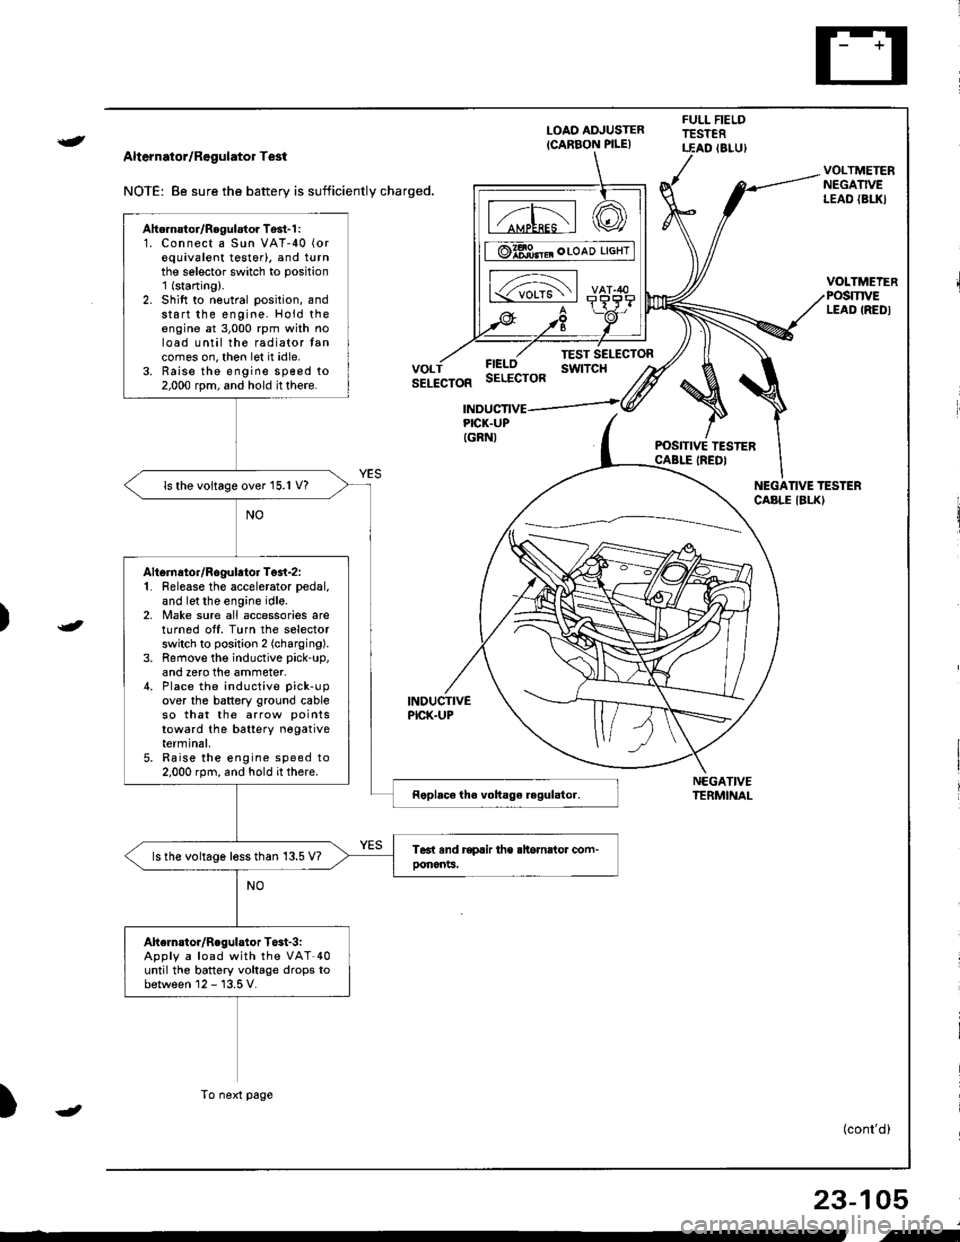 HONDA INTEGRA 1998 4.G Owners Manual {
t
Alternator/Regulator Test
NOTE: 8e sure the battery is sufficiently charged.
LOAO ADJUSTER
ICARBON PILE)
FULL FIELDTESTERT.EAD (8LU)
POSITIVE TESTERCABLE IREDI
NEGATIVETERMINAL
VOLTMETERNEGATIVELE